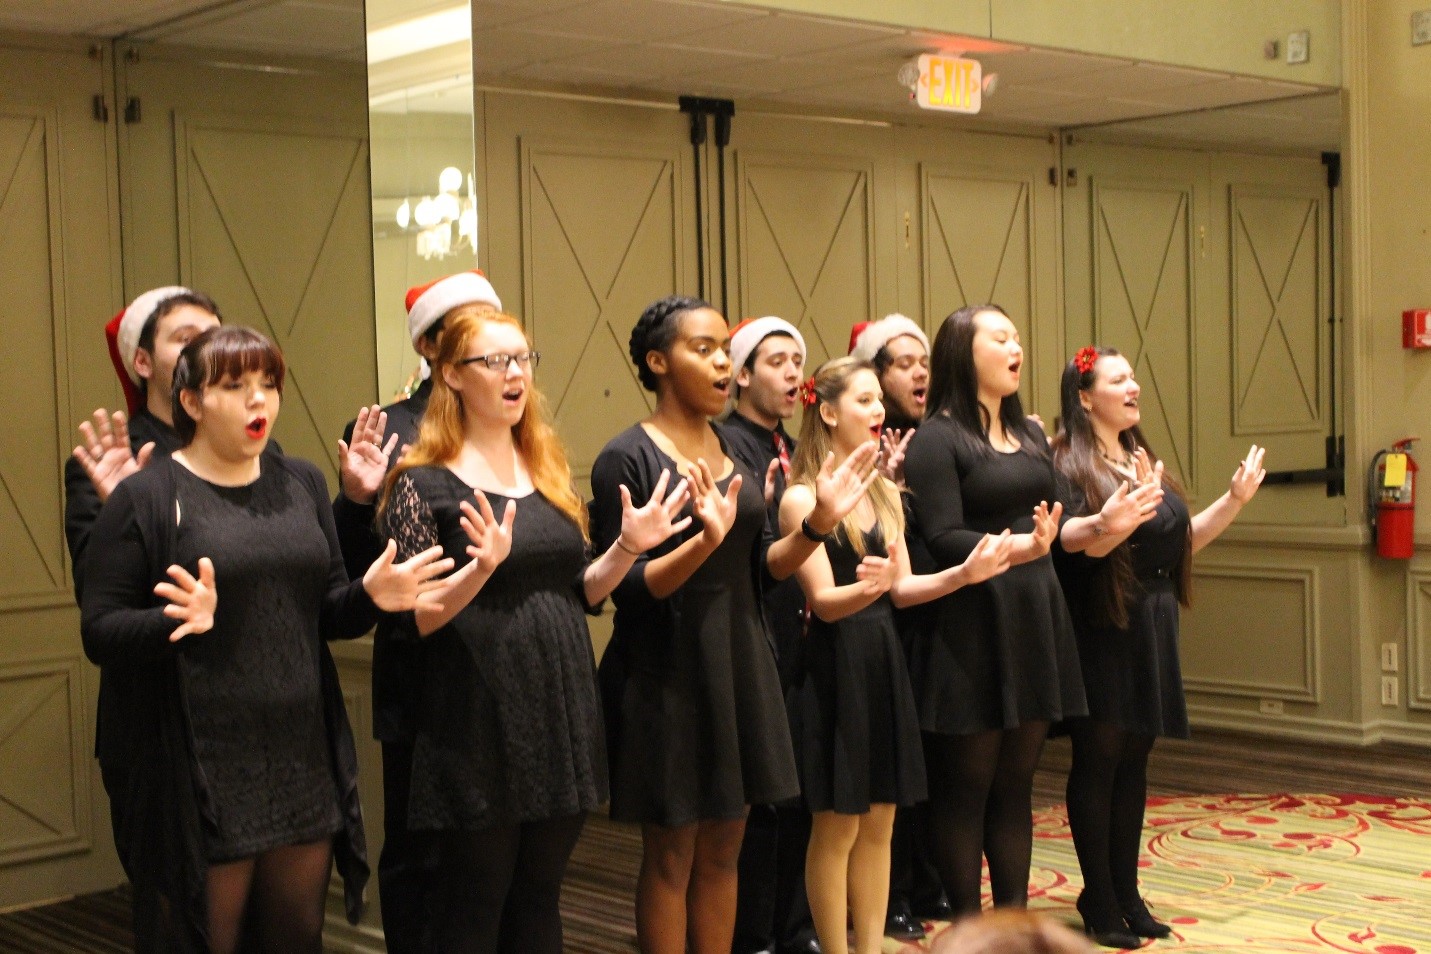 Manhattanville College’s elite pop group, The Quintessentials, provided holiday entertainment for guests at the HOW’s annual “Tree of Life” celebration.